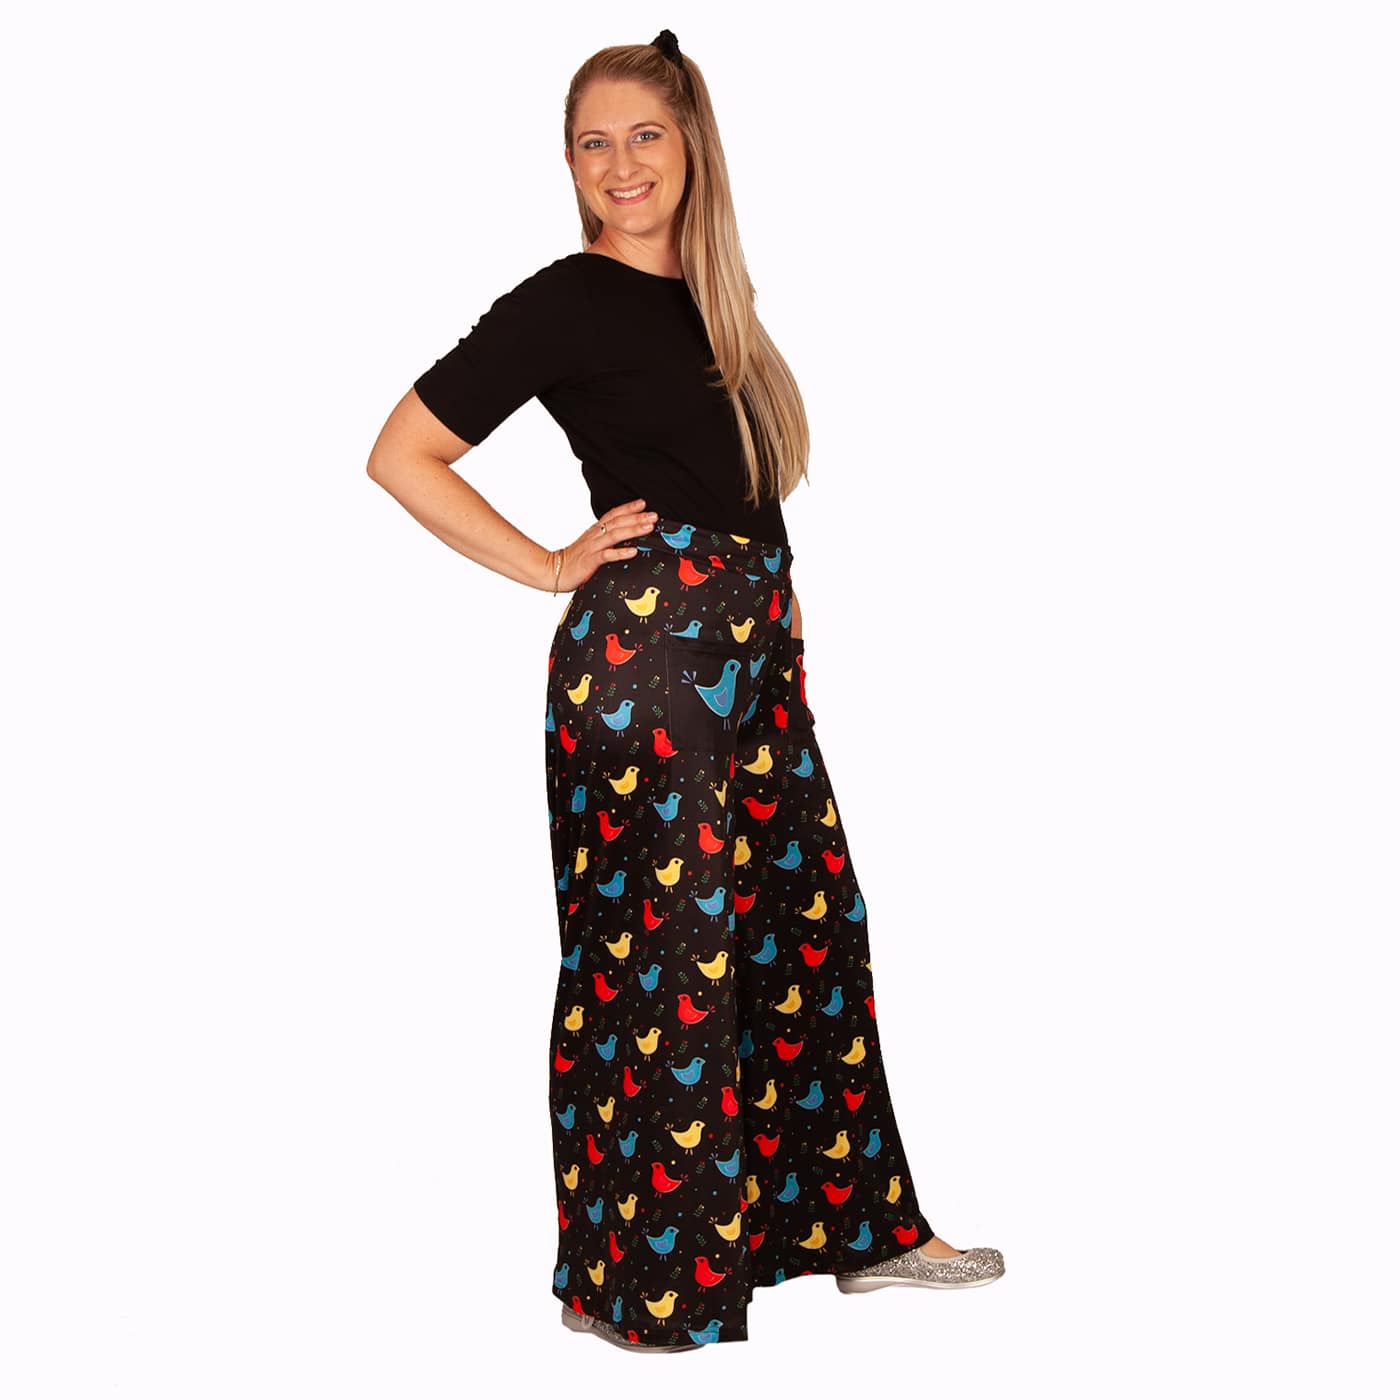 Chirp Wide Leg Pants by RainbowsAndFairies.com.au (Cute Birds - Partridge Family Inspired - Pants With Pockets - Pallazo Pants - Flares) - SKU: CL_WIDEL_CHIRP_ORG - Pic-04